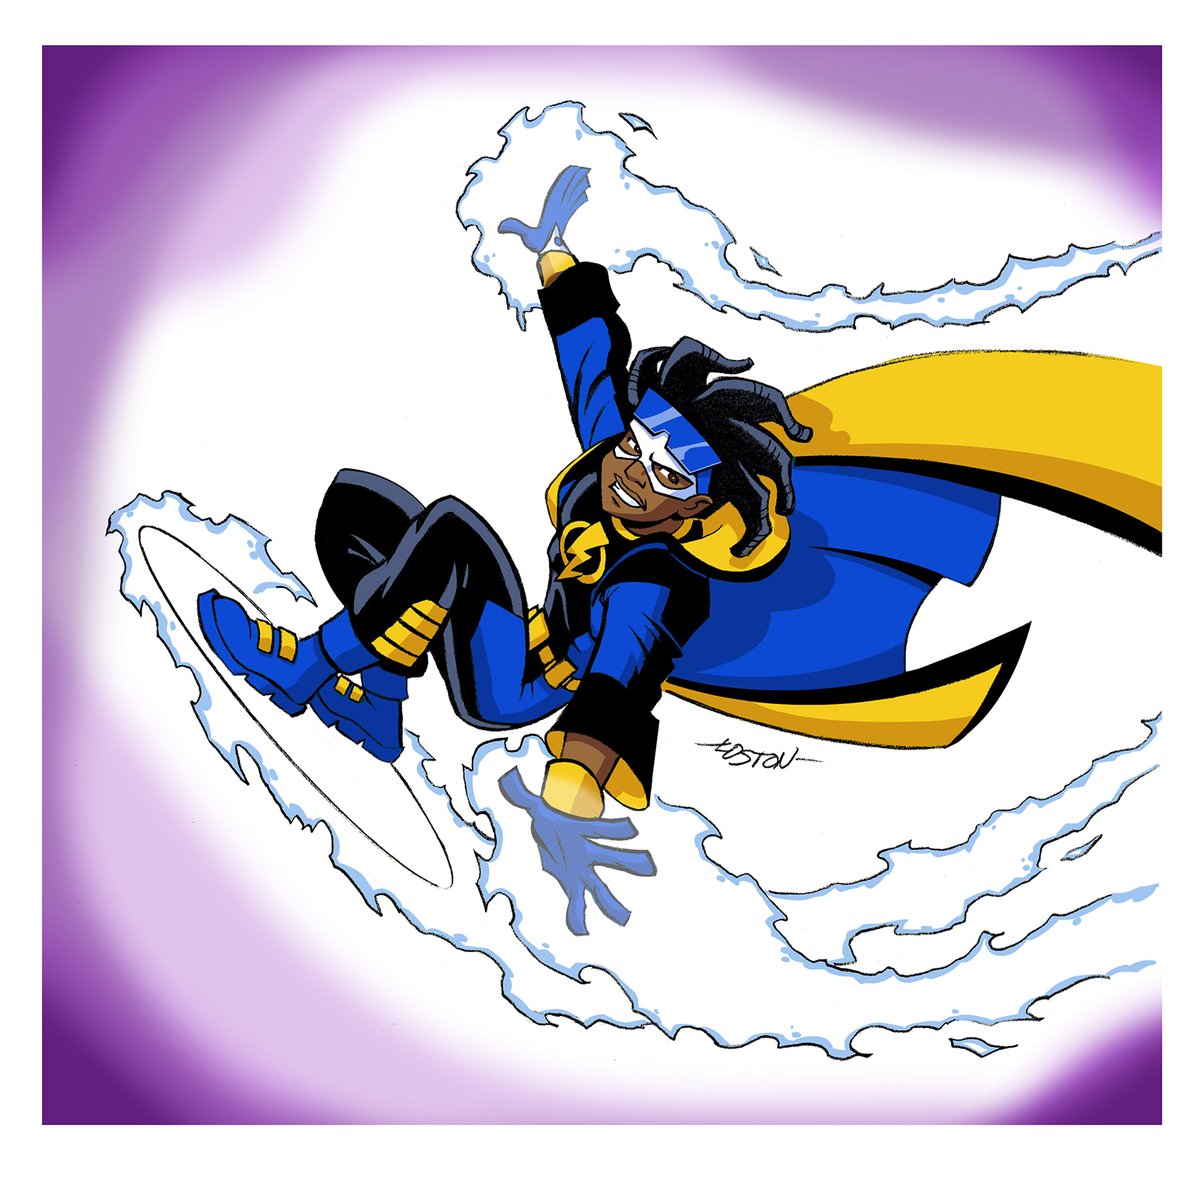 #StaticShock #DwayneMcDuffie #MilestoneMedia #DenysCowan #MichaelDavis #DerekDingle 
I really enjoyed watching this guy on the WB back in the day. What a cool character!